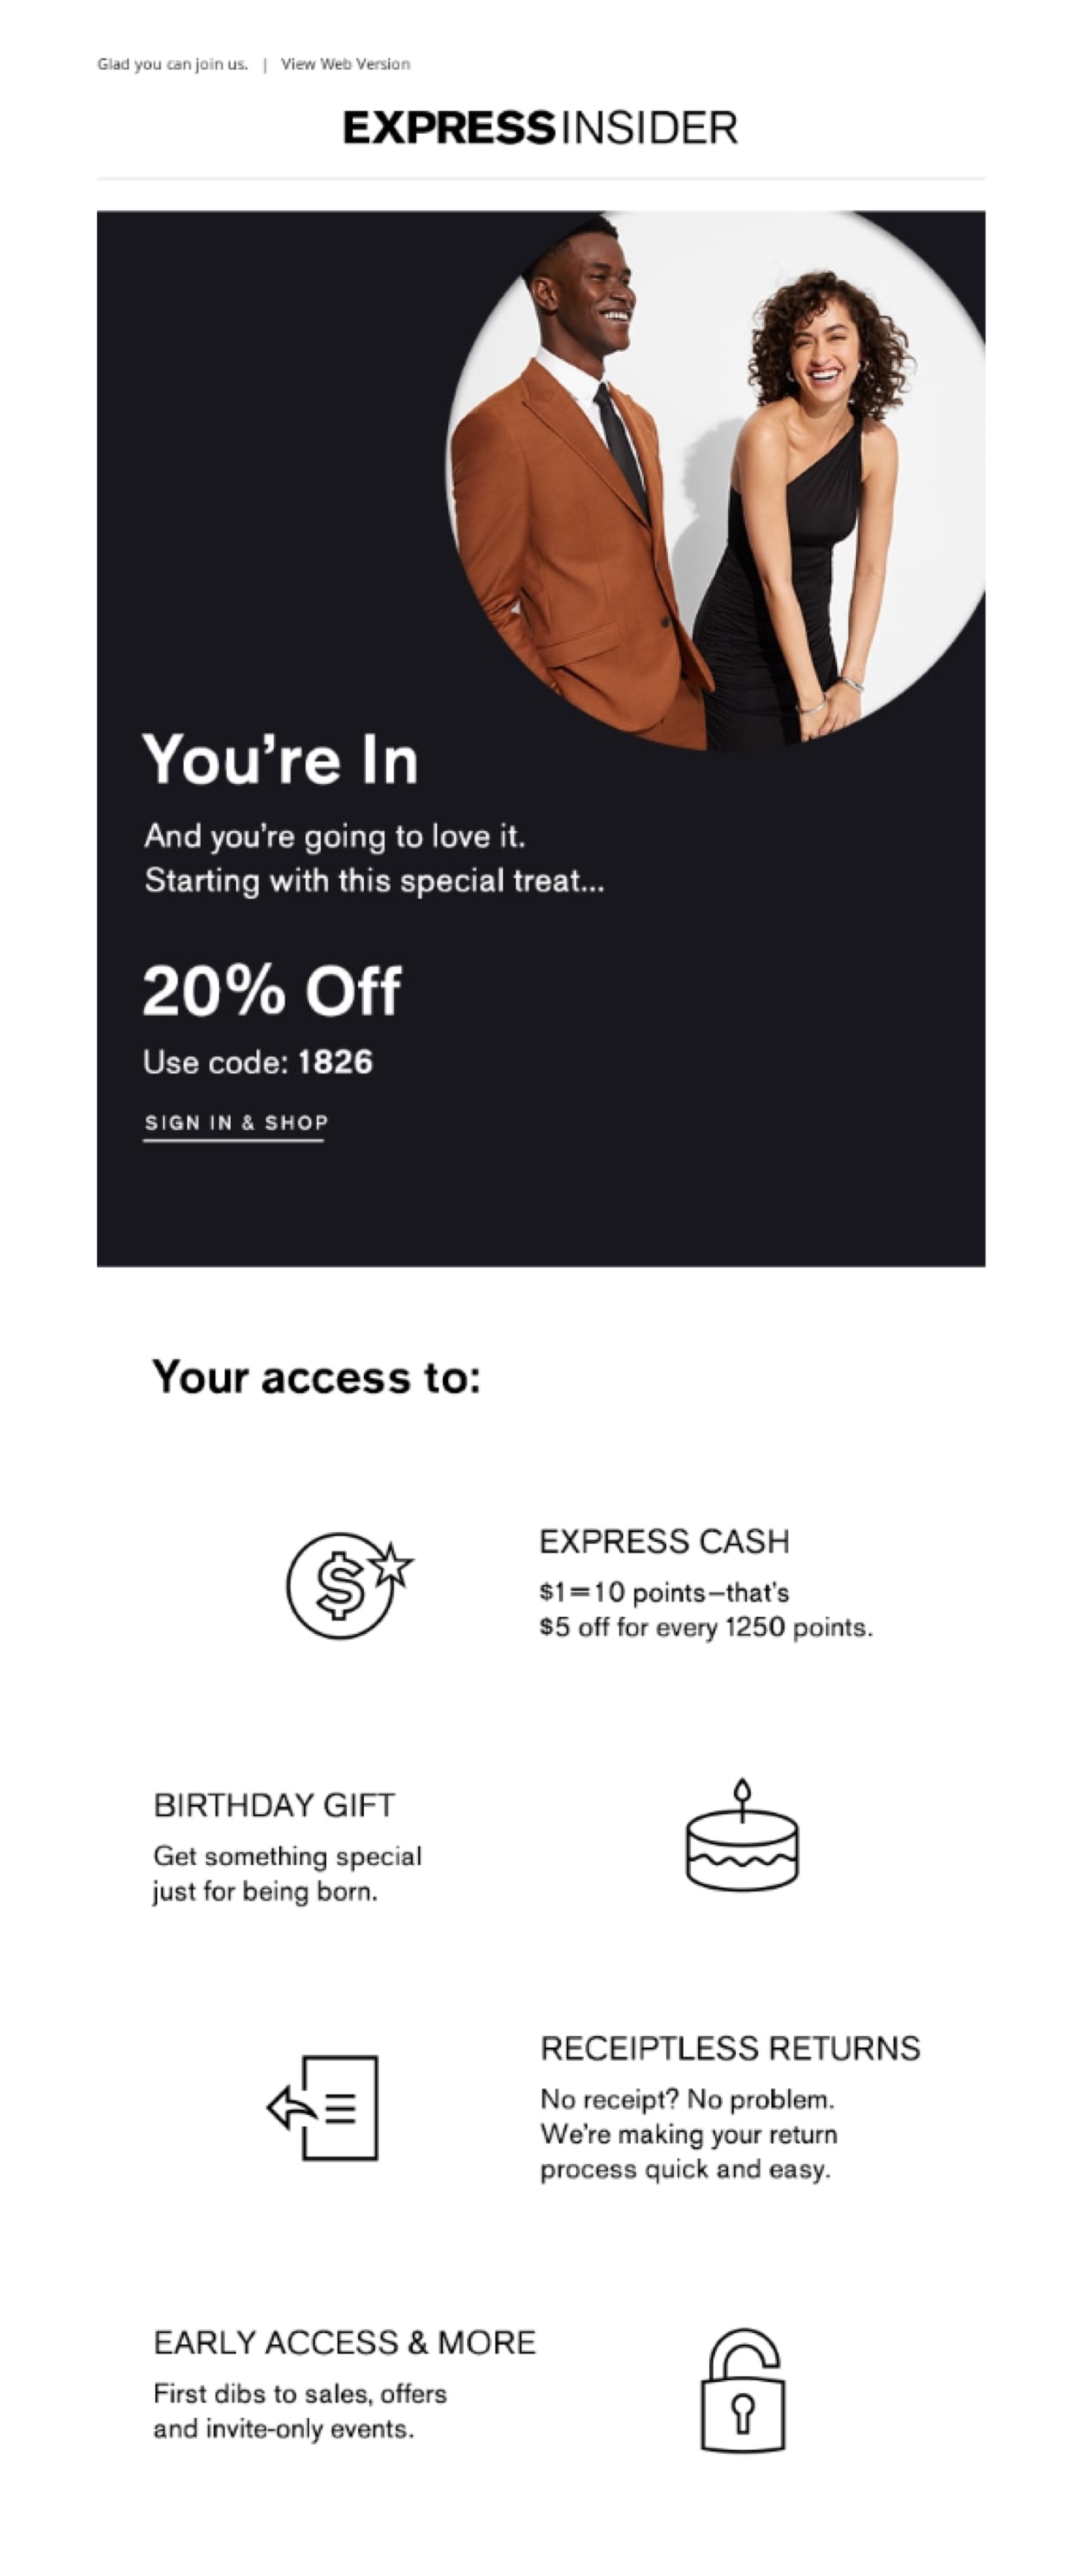 email example from Express